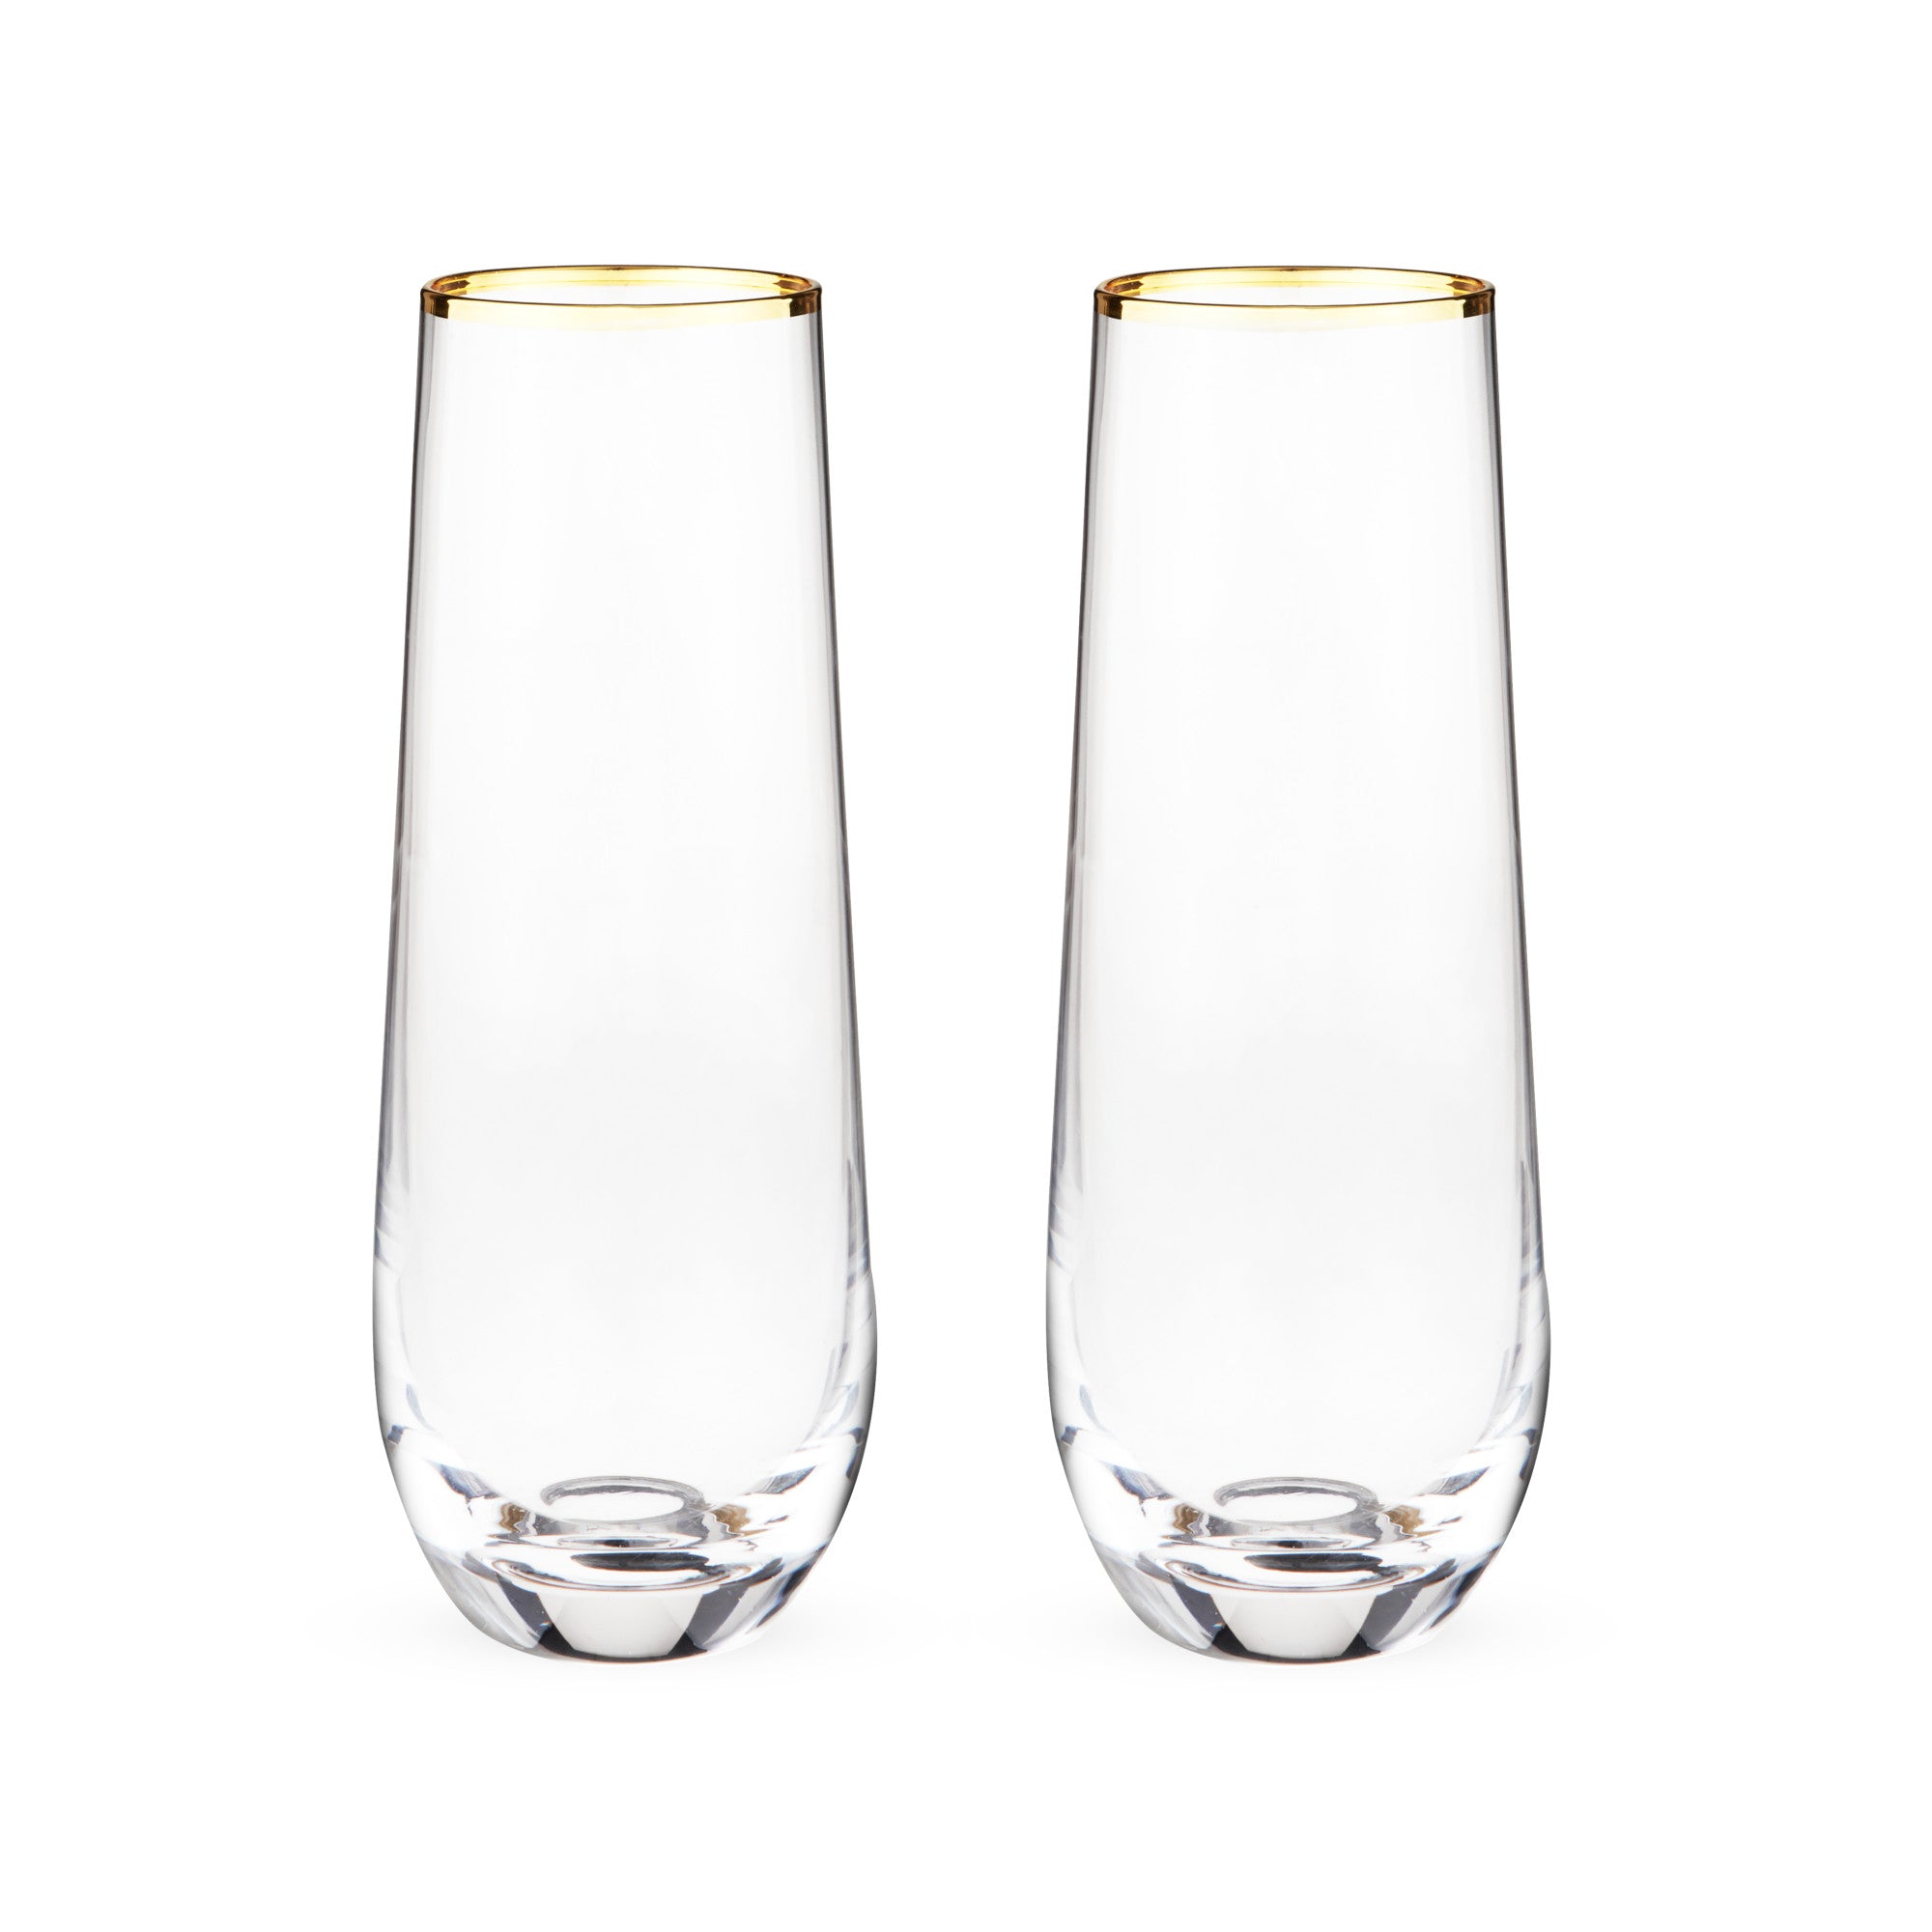 Gilded Stemless Champagne Flute Set by Twine Living® (10759) Drinkware Twine